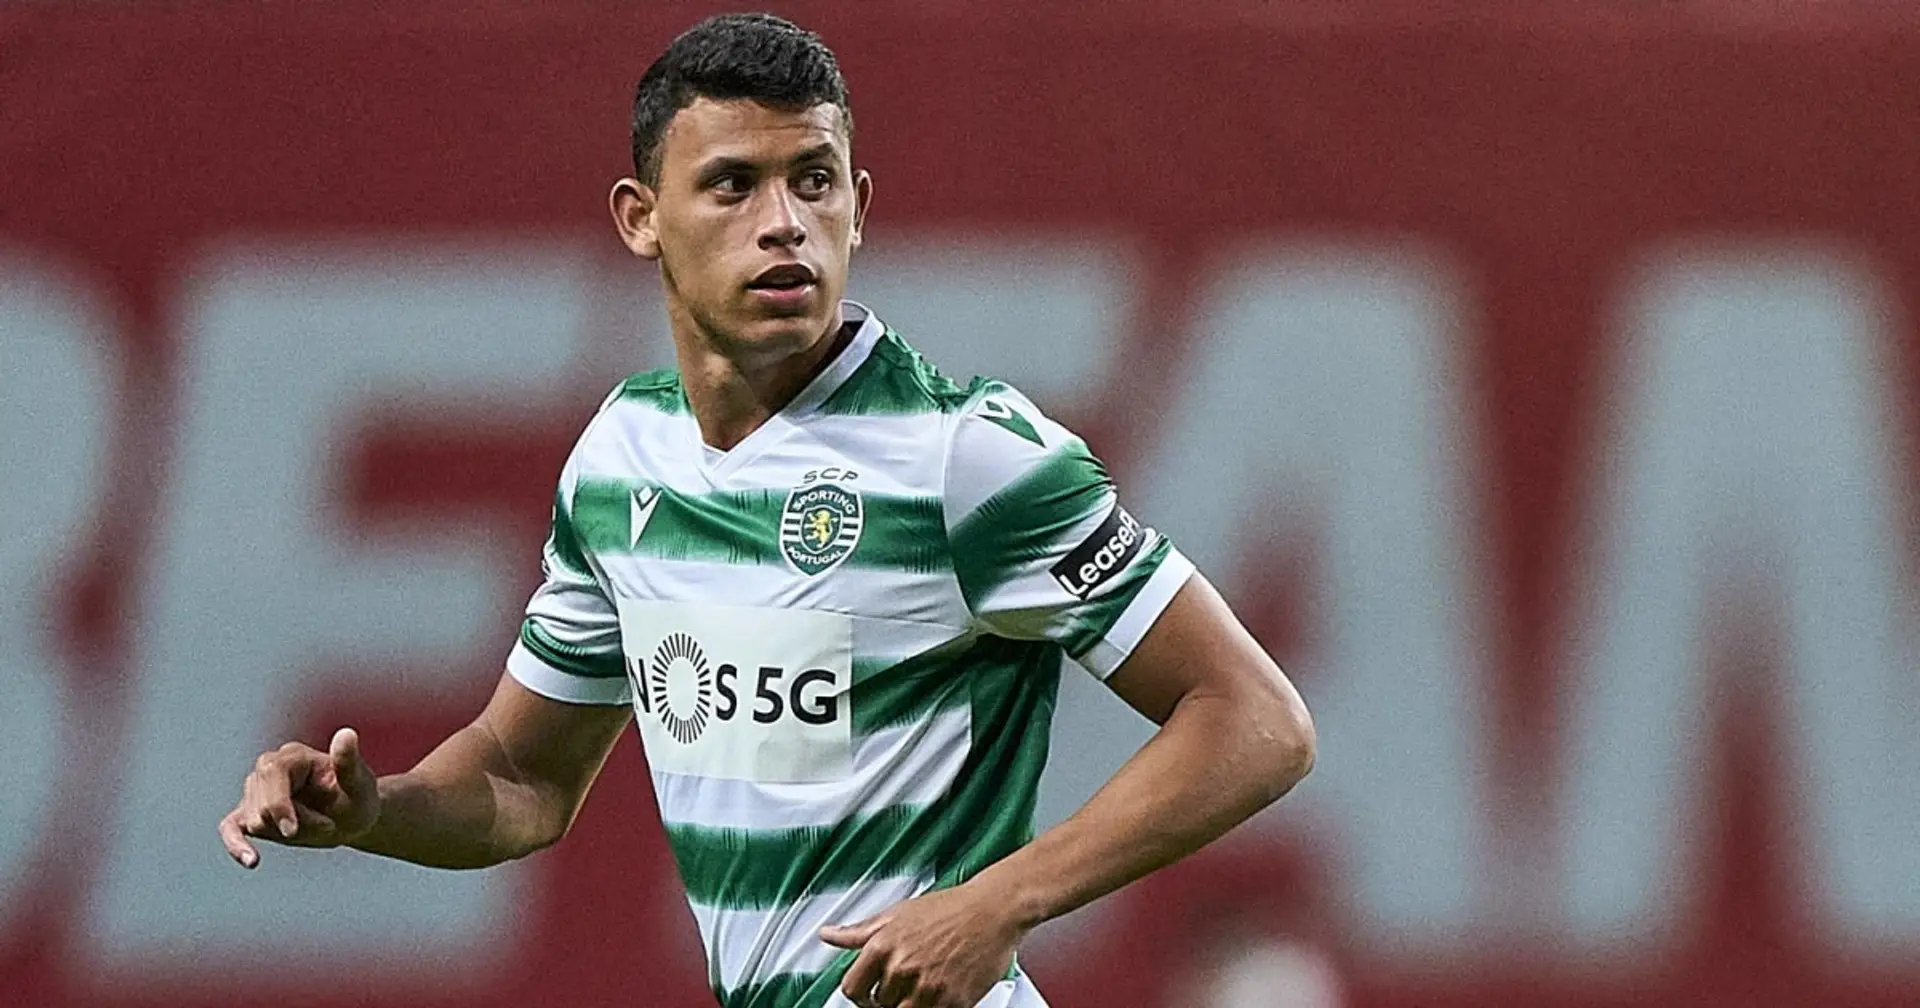 Liverpool preparing to bid for Sporting youngster Matheus Nunes (reliability: 3 stars)